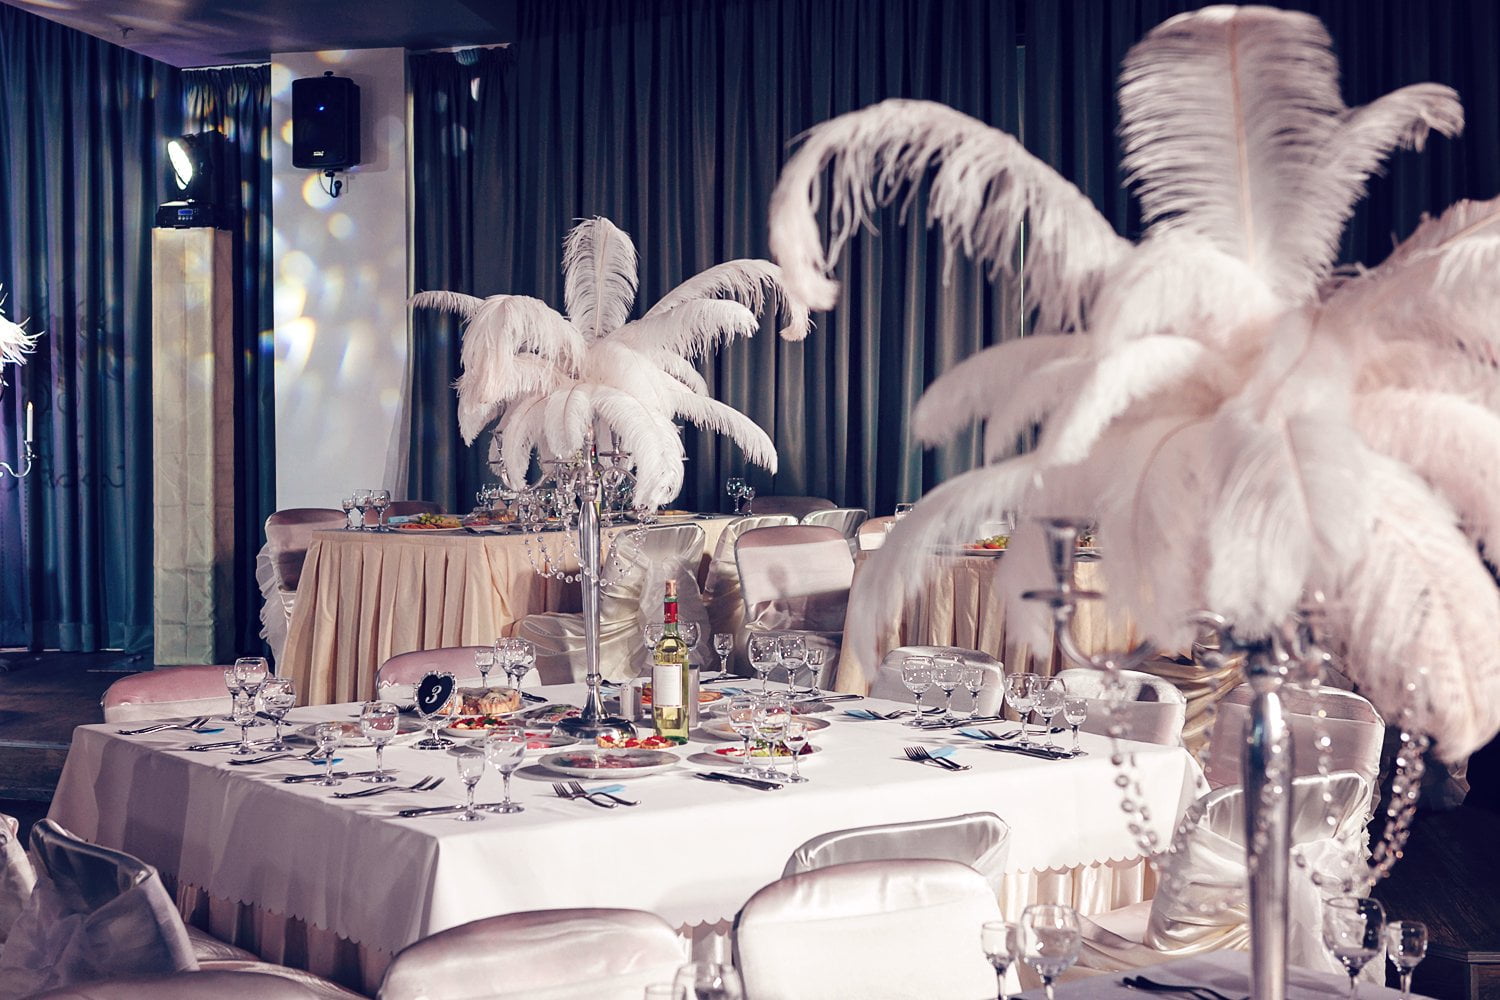 CENFRY 10pcs Ostrich Feathers 10-12inch Plumes for Wedding Centerpieces Home Decoration White